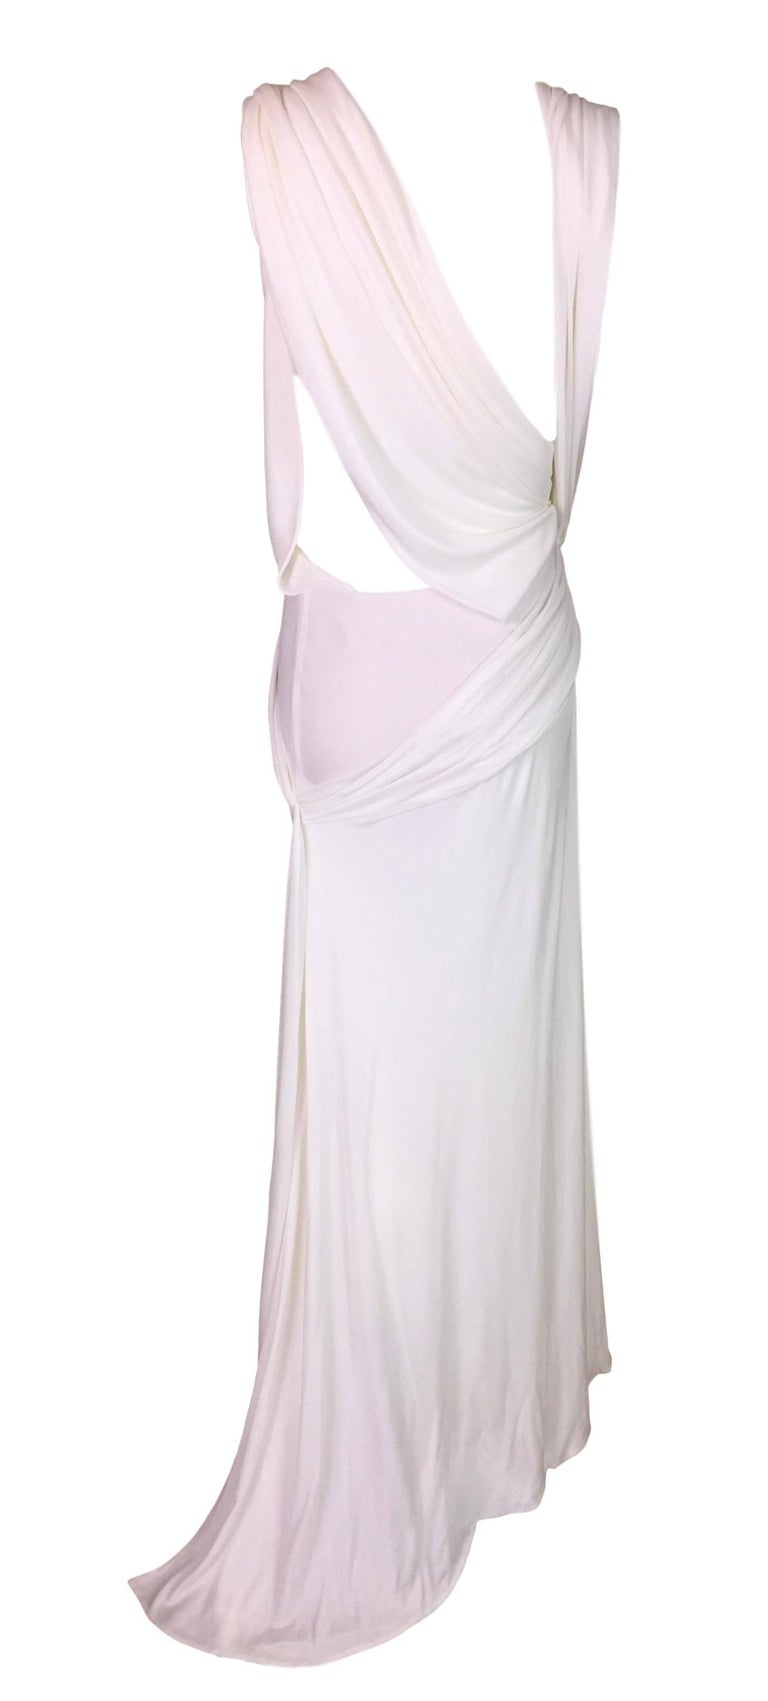 F/W 1999 Atelier Versace Sheer White Plunging Beaded Medusa Gown Dress ...